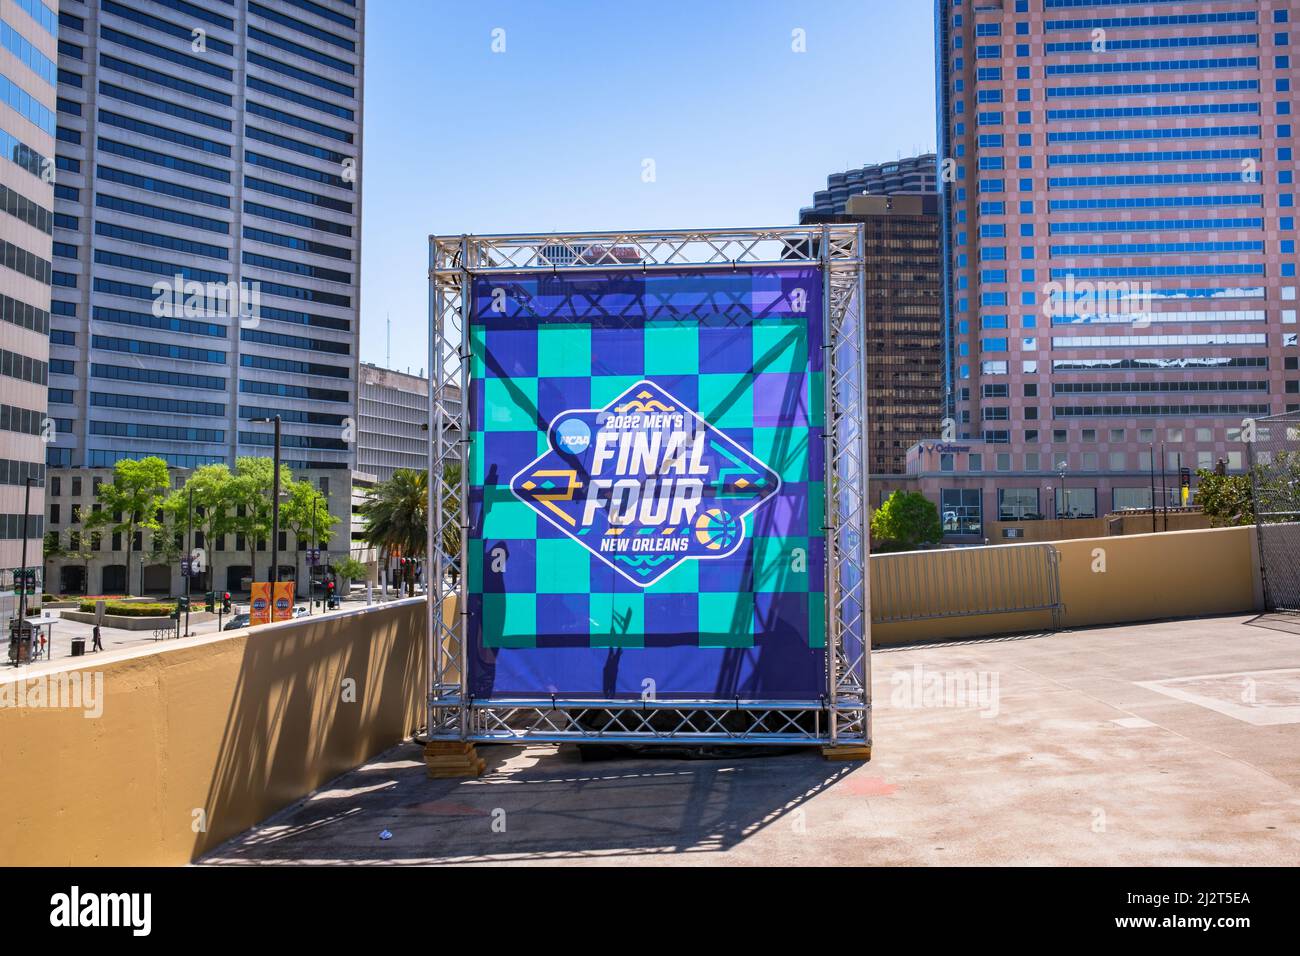 NEW ORLEANS, LA, USA - APRIL 3, 2022: NCAA 2022 Men's Final Four Sign in front of the Superdome in the Central Business District with office buildings Stock Photo